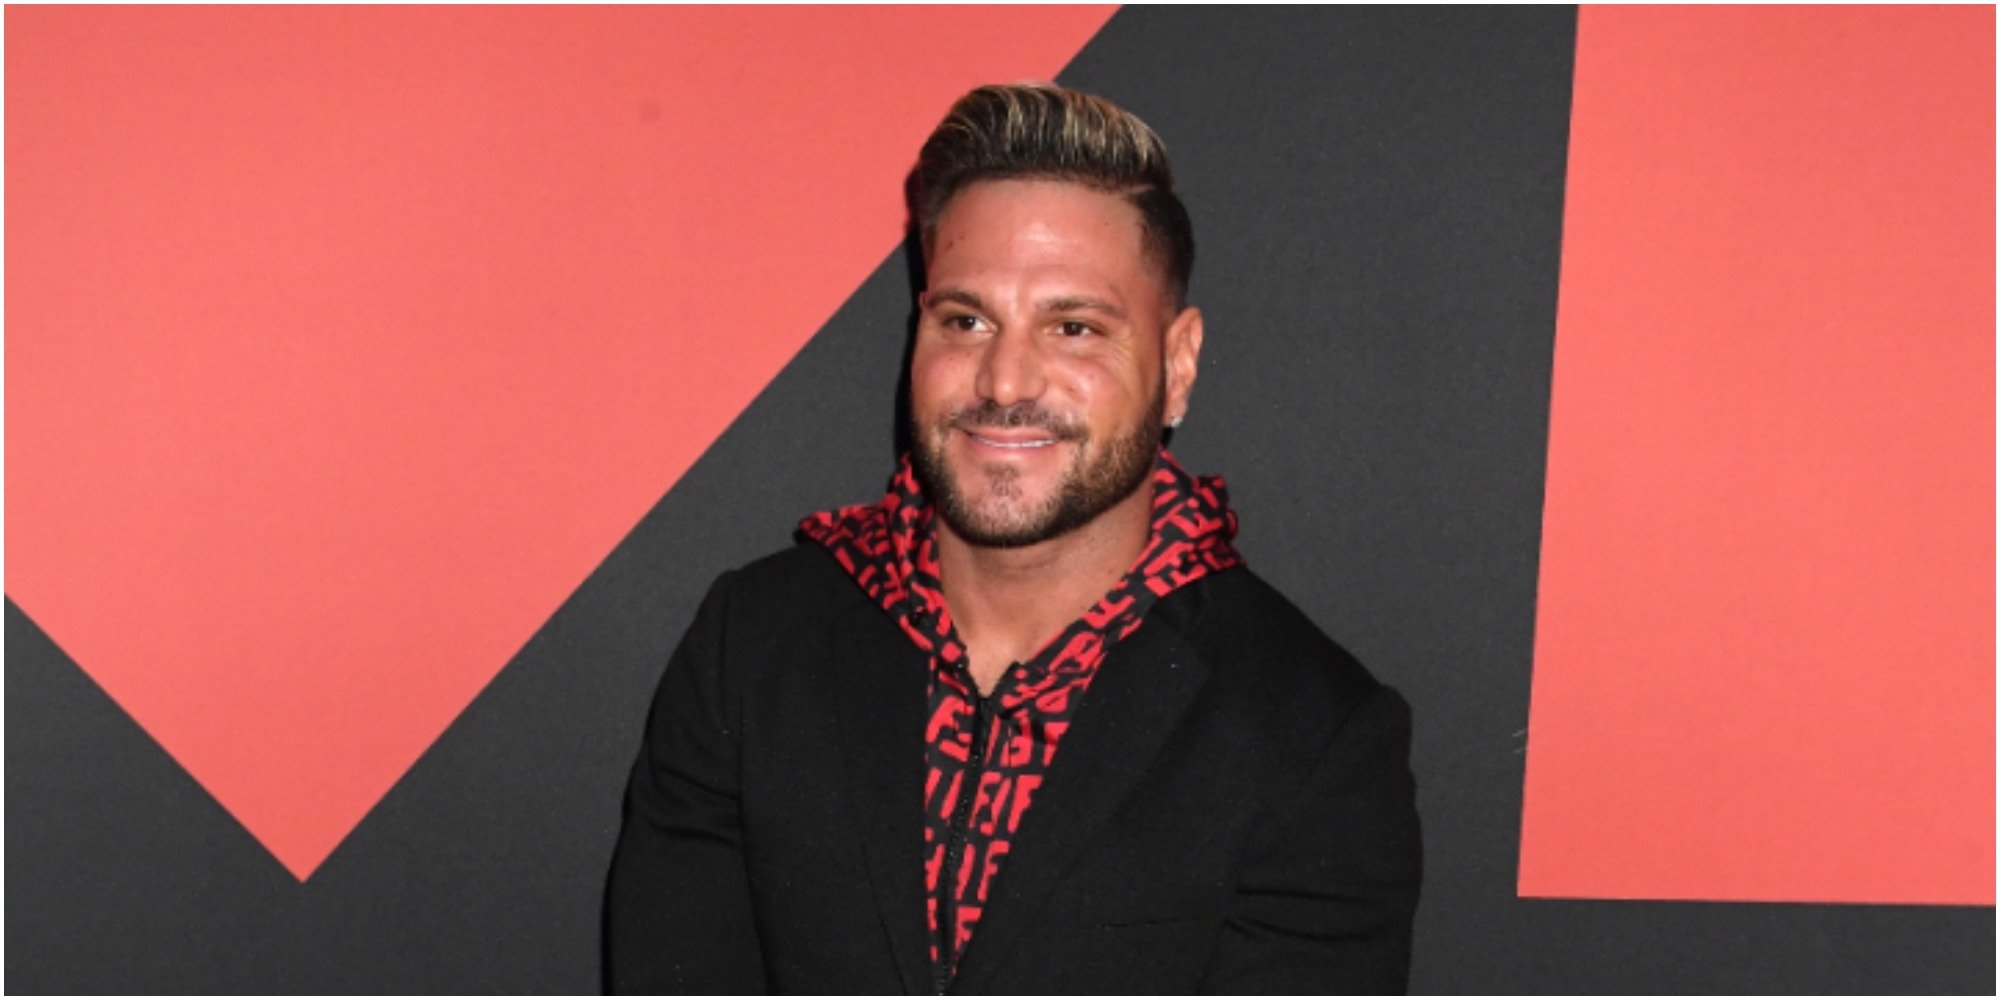 Ronnie Ortiz Magro poses on the red carpet.